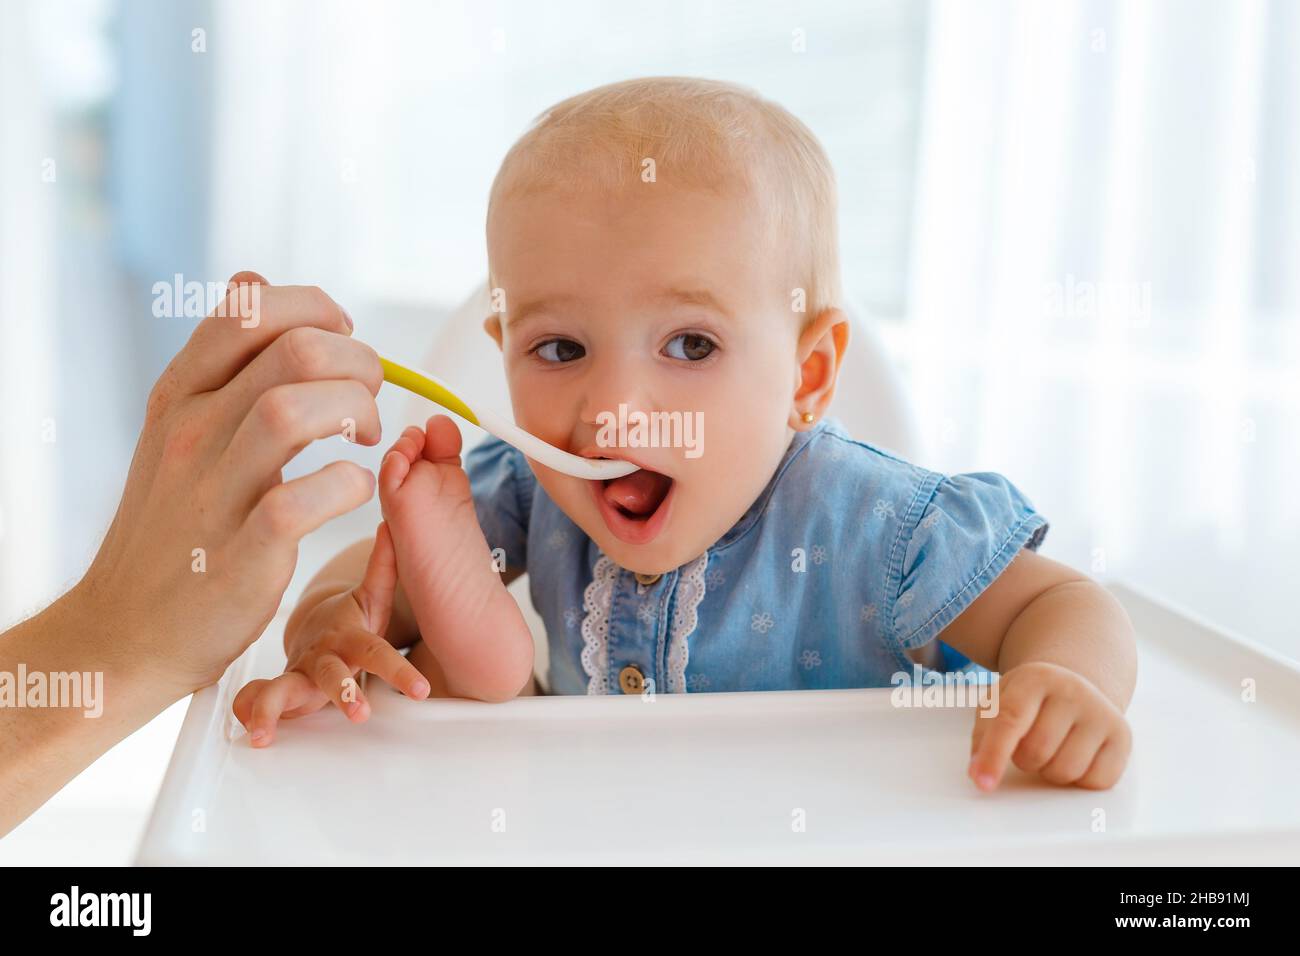 Very cute and funny baby with the spoon in hands eating kids nutrition - fruit puree. Smiling little girl eating in fun pose on white feeding table. C Stock Photo